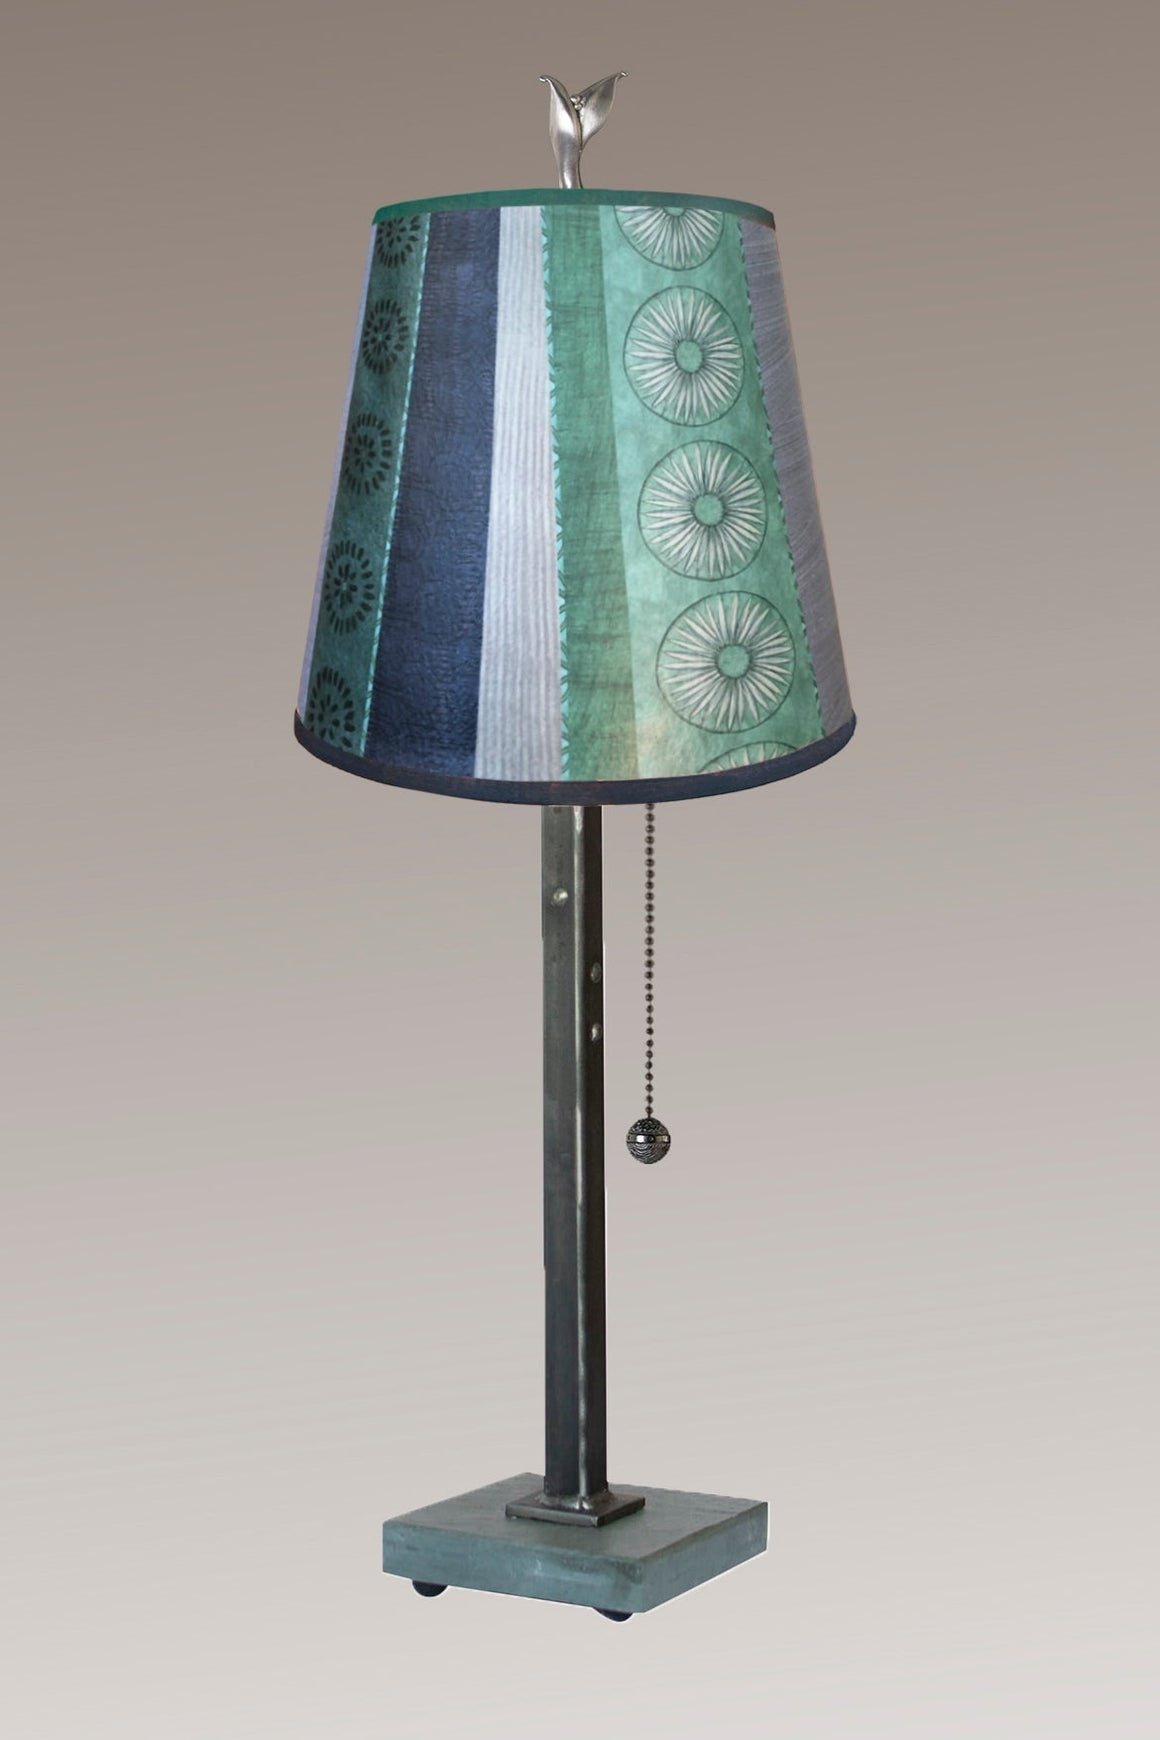 Steel Table Lamp with Small Drum Shade in Serape Waters